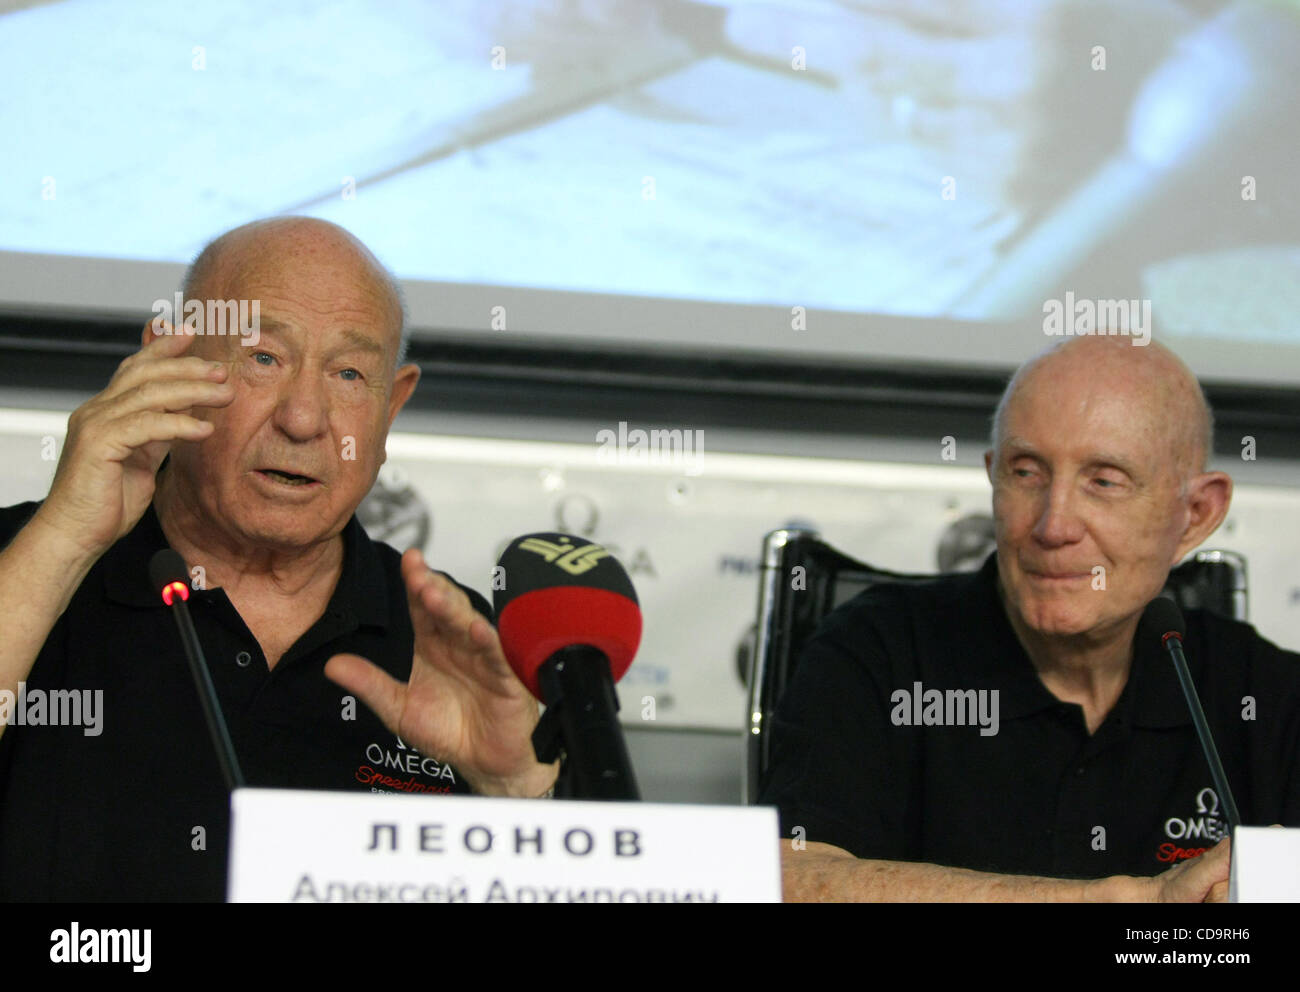 35th anniversary of Apollo-Soyuz Test Project was celebrated in Moscow. Pictured: l-r cosmonaut Alexei Leonov and U.S. astronaut Thomas Stafford at the press conference in Moscow. On July 15, 1975, the Soyuz-19 spacecraft with cosmonauts Alexei Leonov and Valery Kubasov onboard lifted off from the B Stock Photo